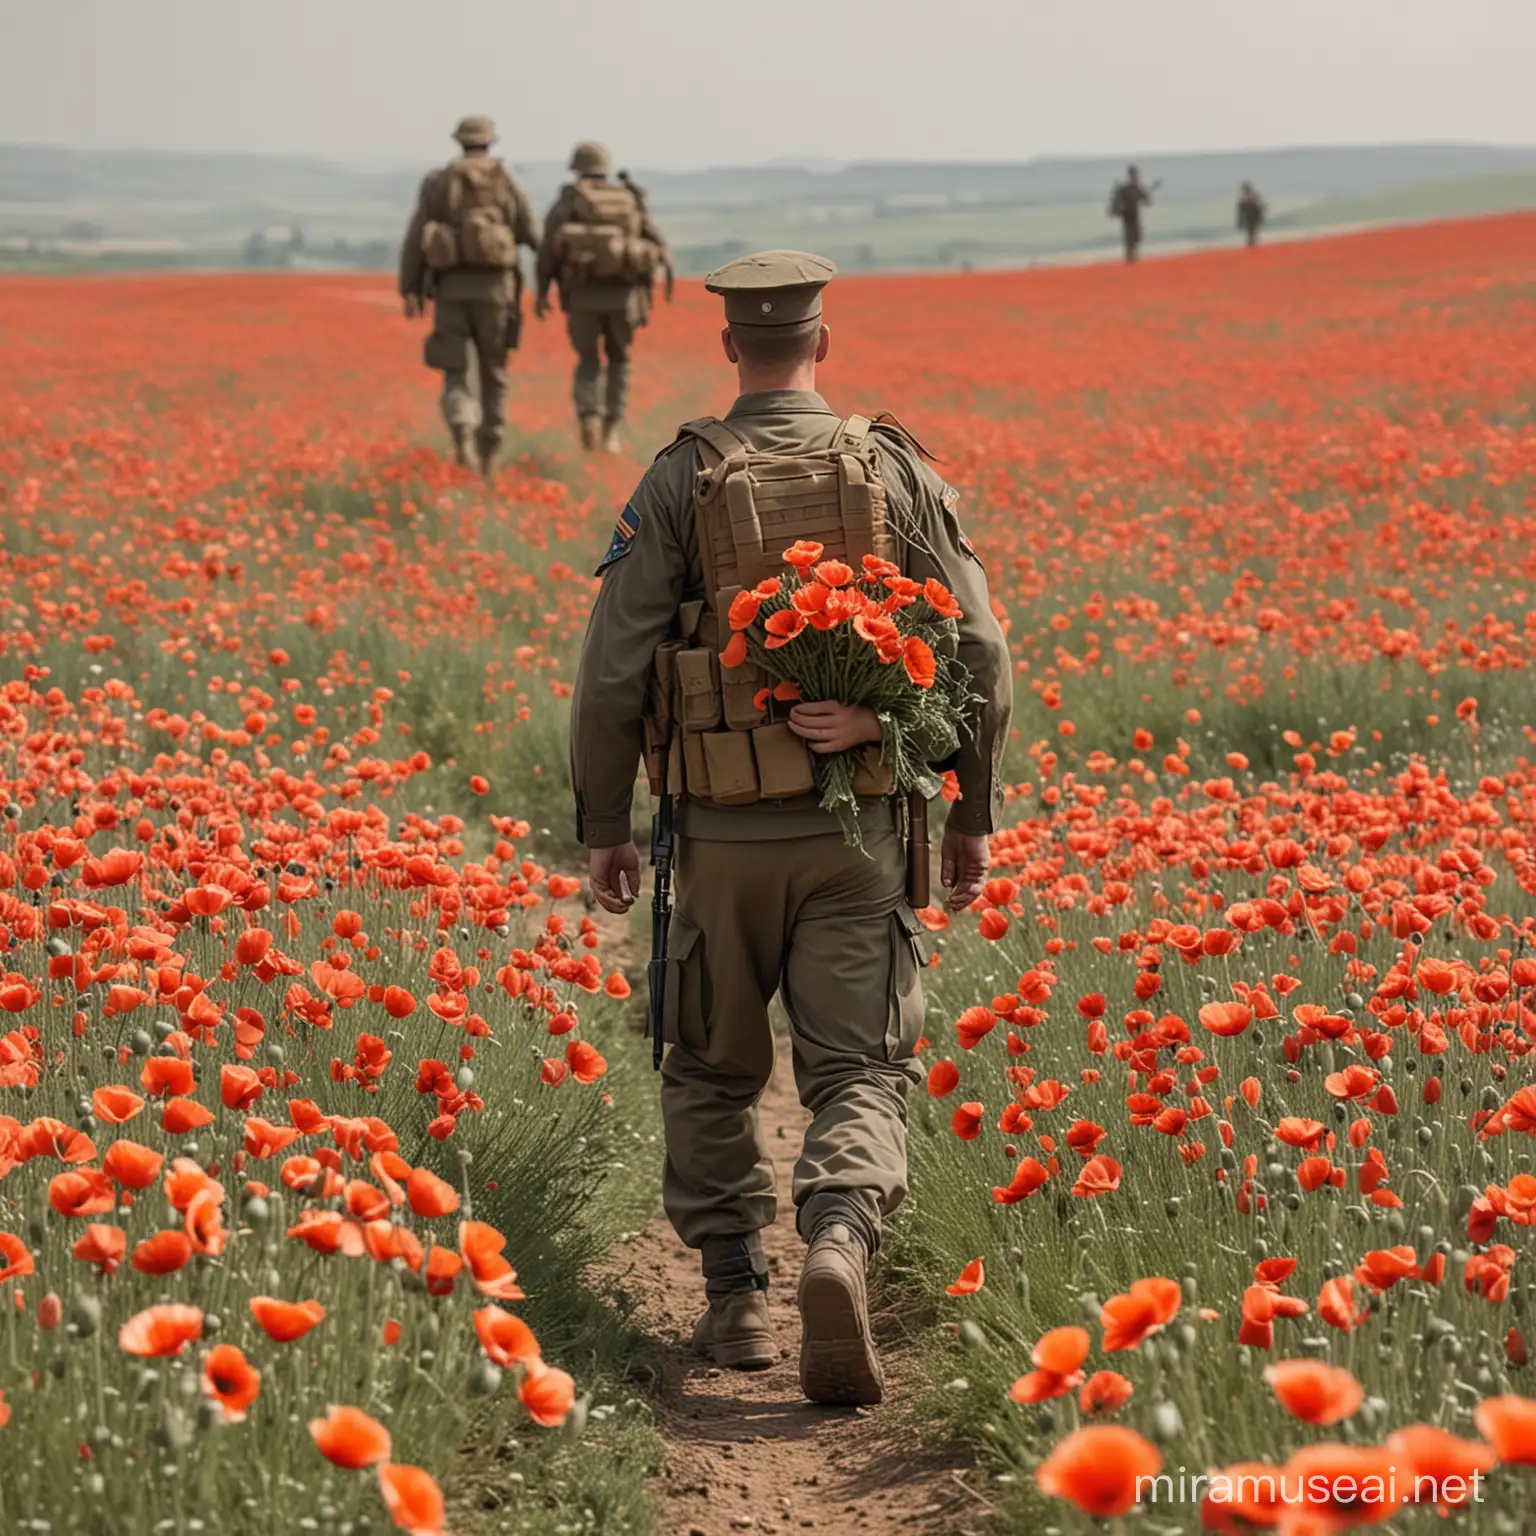 Soldier carrying  friend through poppies  while war in background